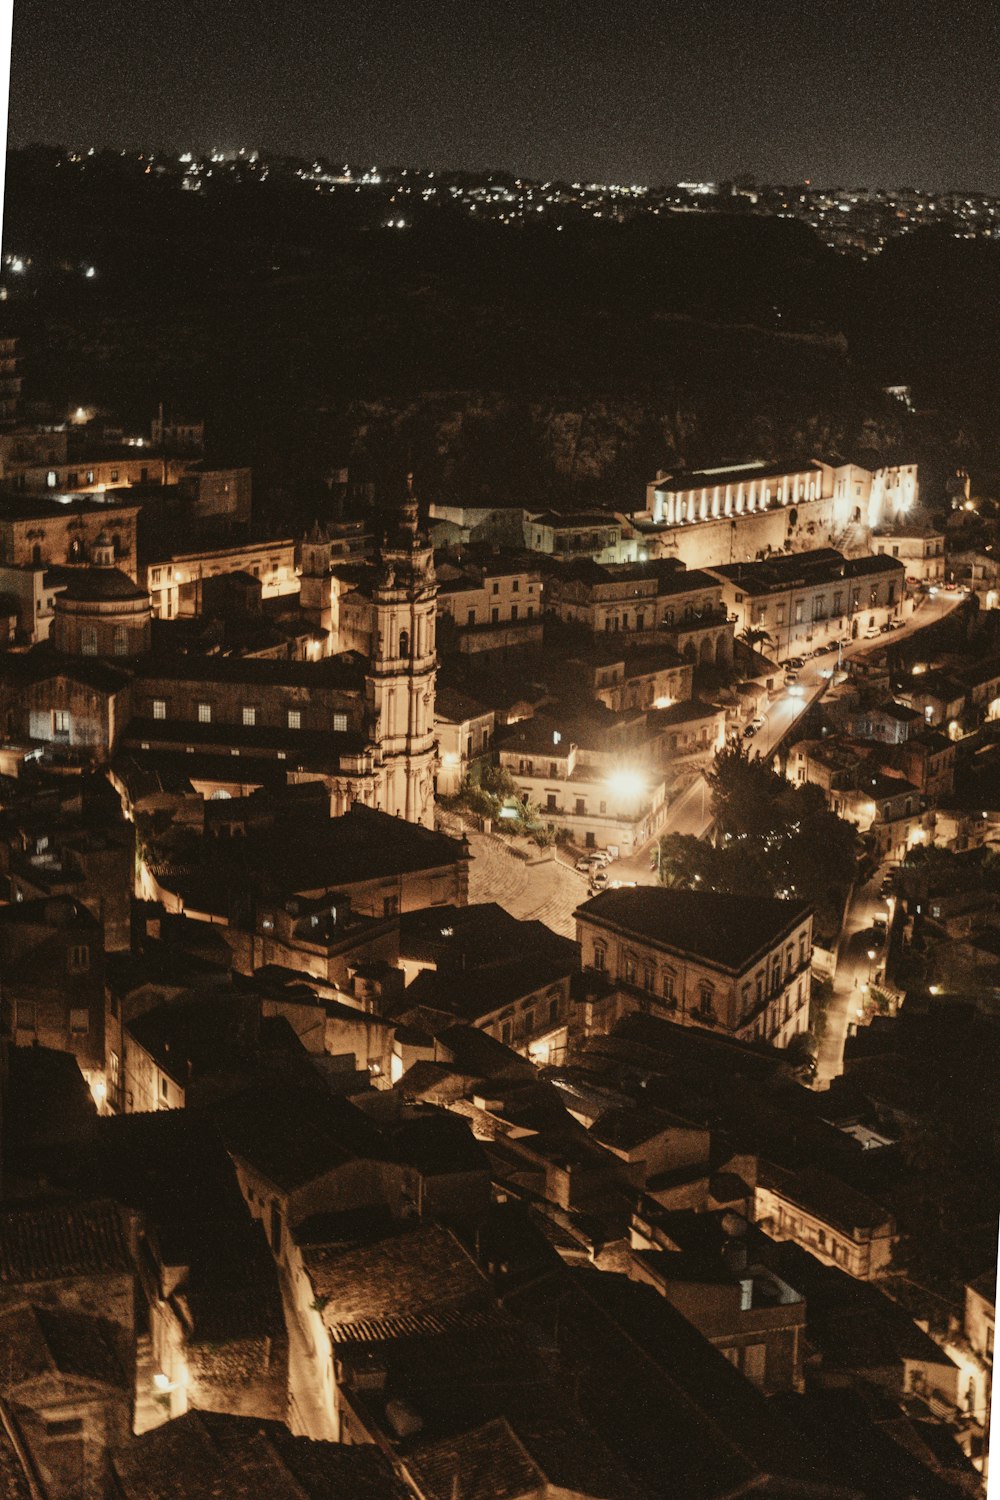 a view of a city at night from a high point of view